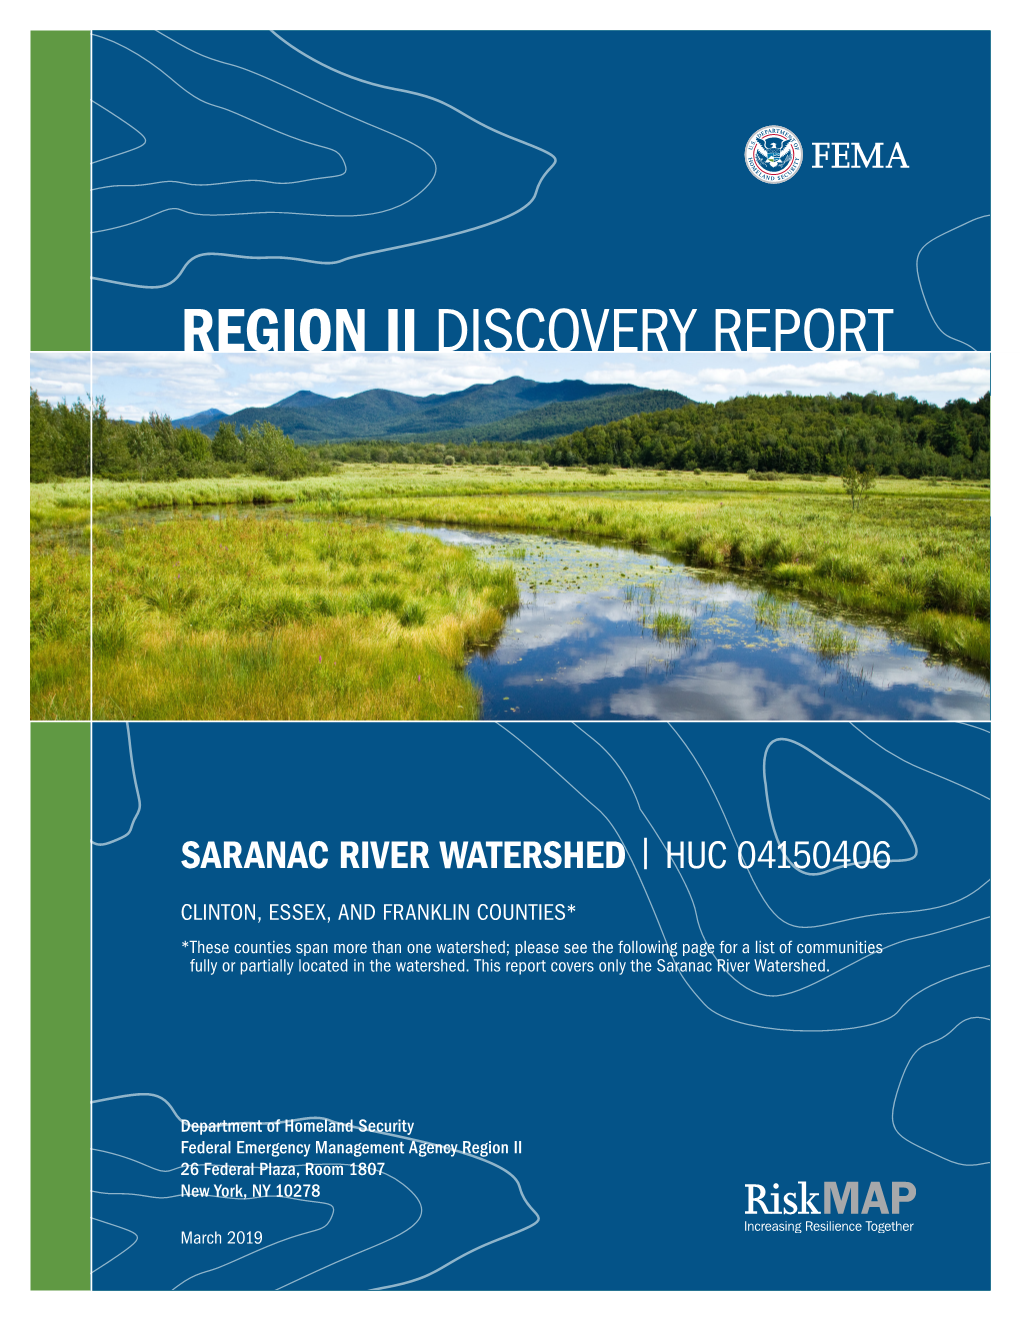 Flood Risk Discovery Report Saranac River Watershed